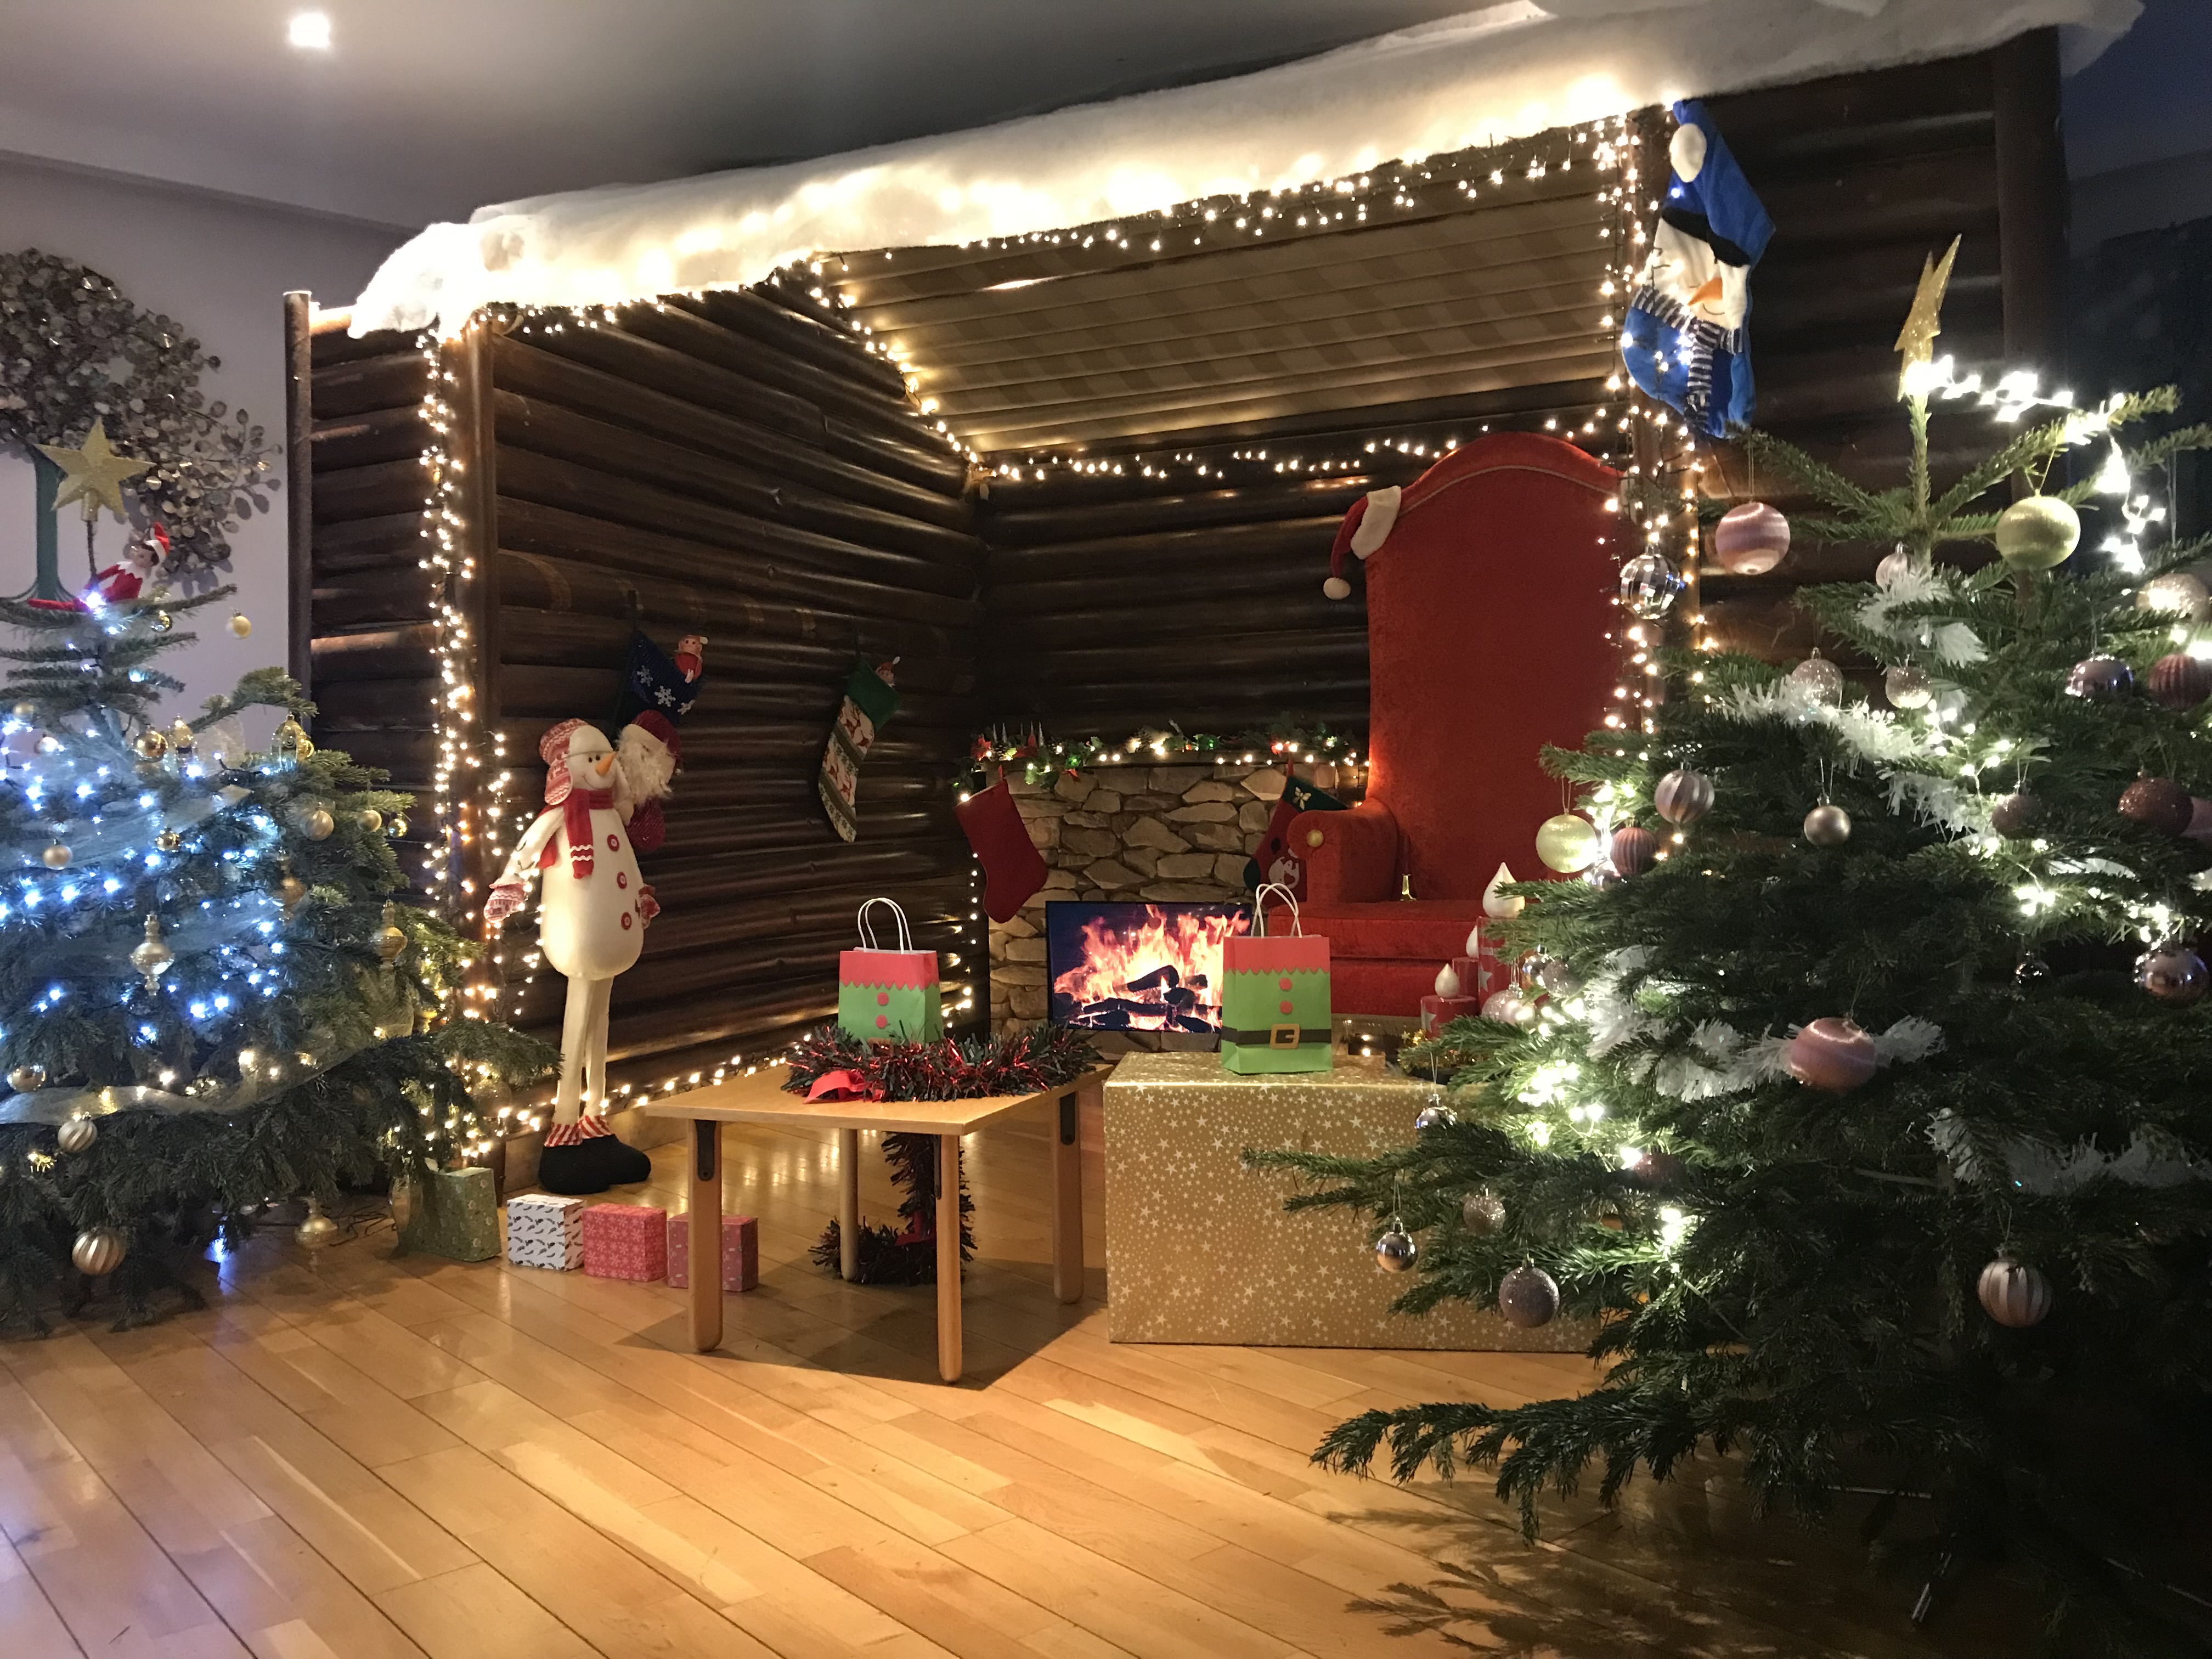 A Christmas grotto, with a chair for Santa and lots of festive decorations.